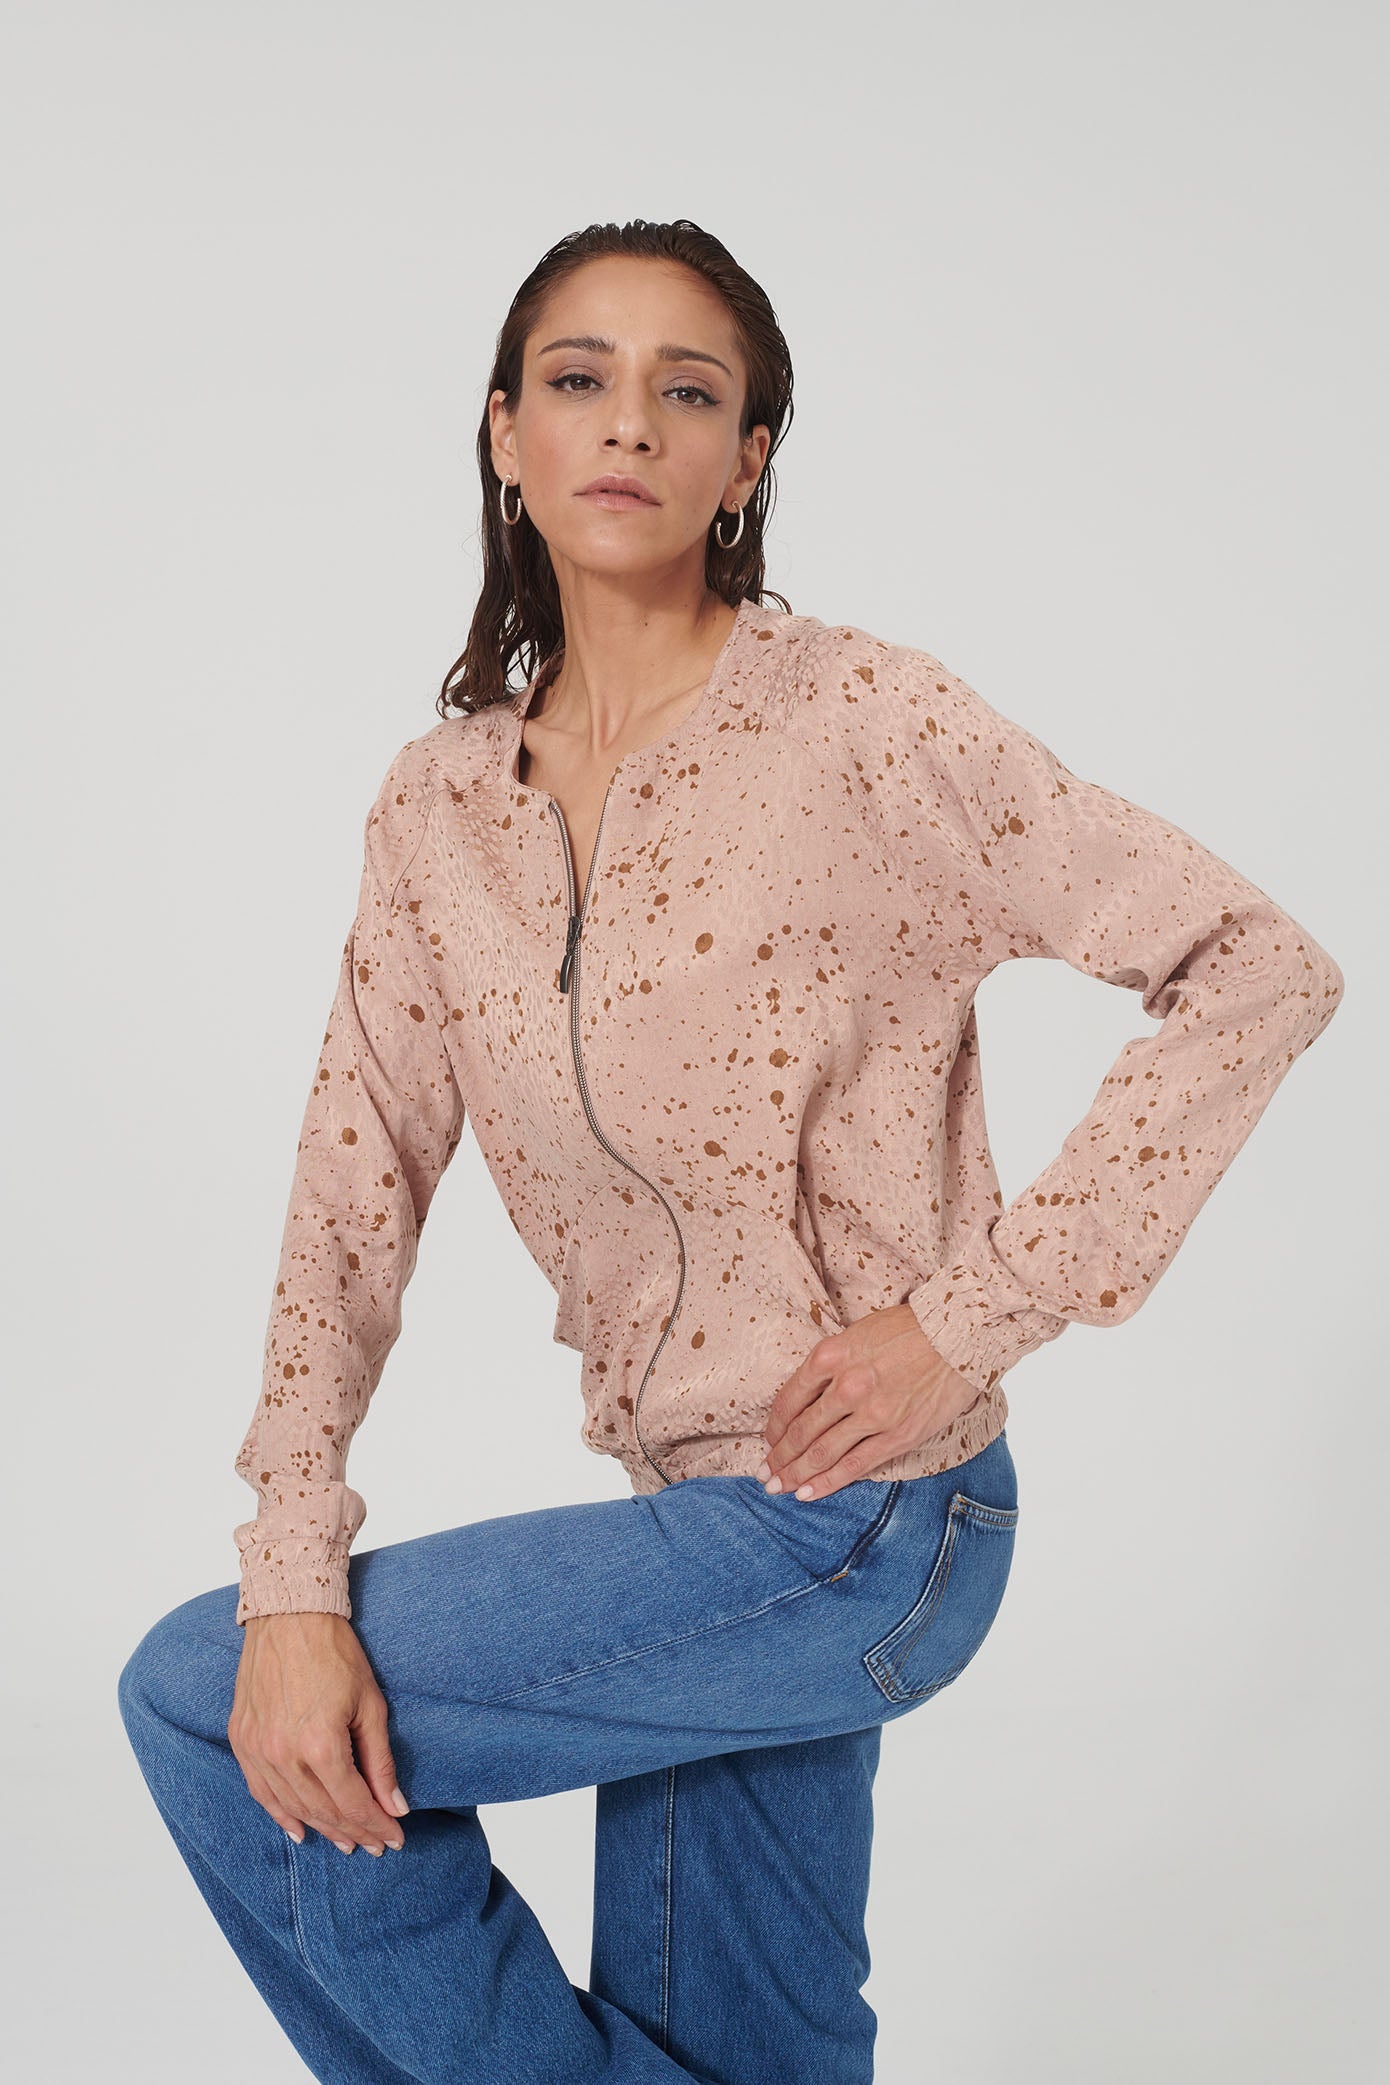 Blouson BOCA in rose-colored jacquard by LOVJOI made of Cupro and Ecovero™